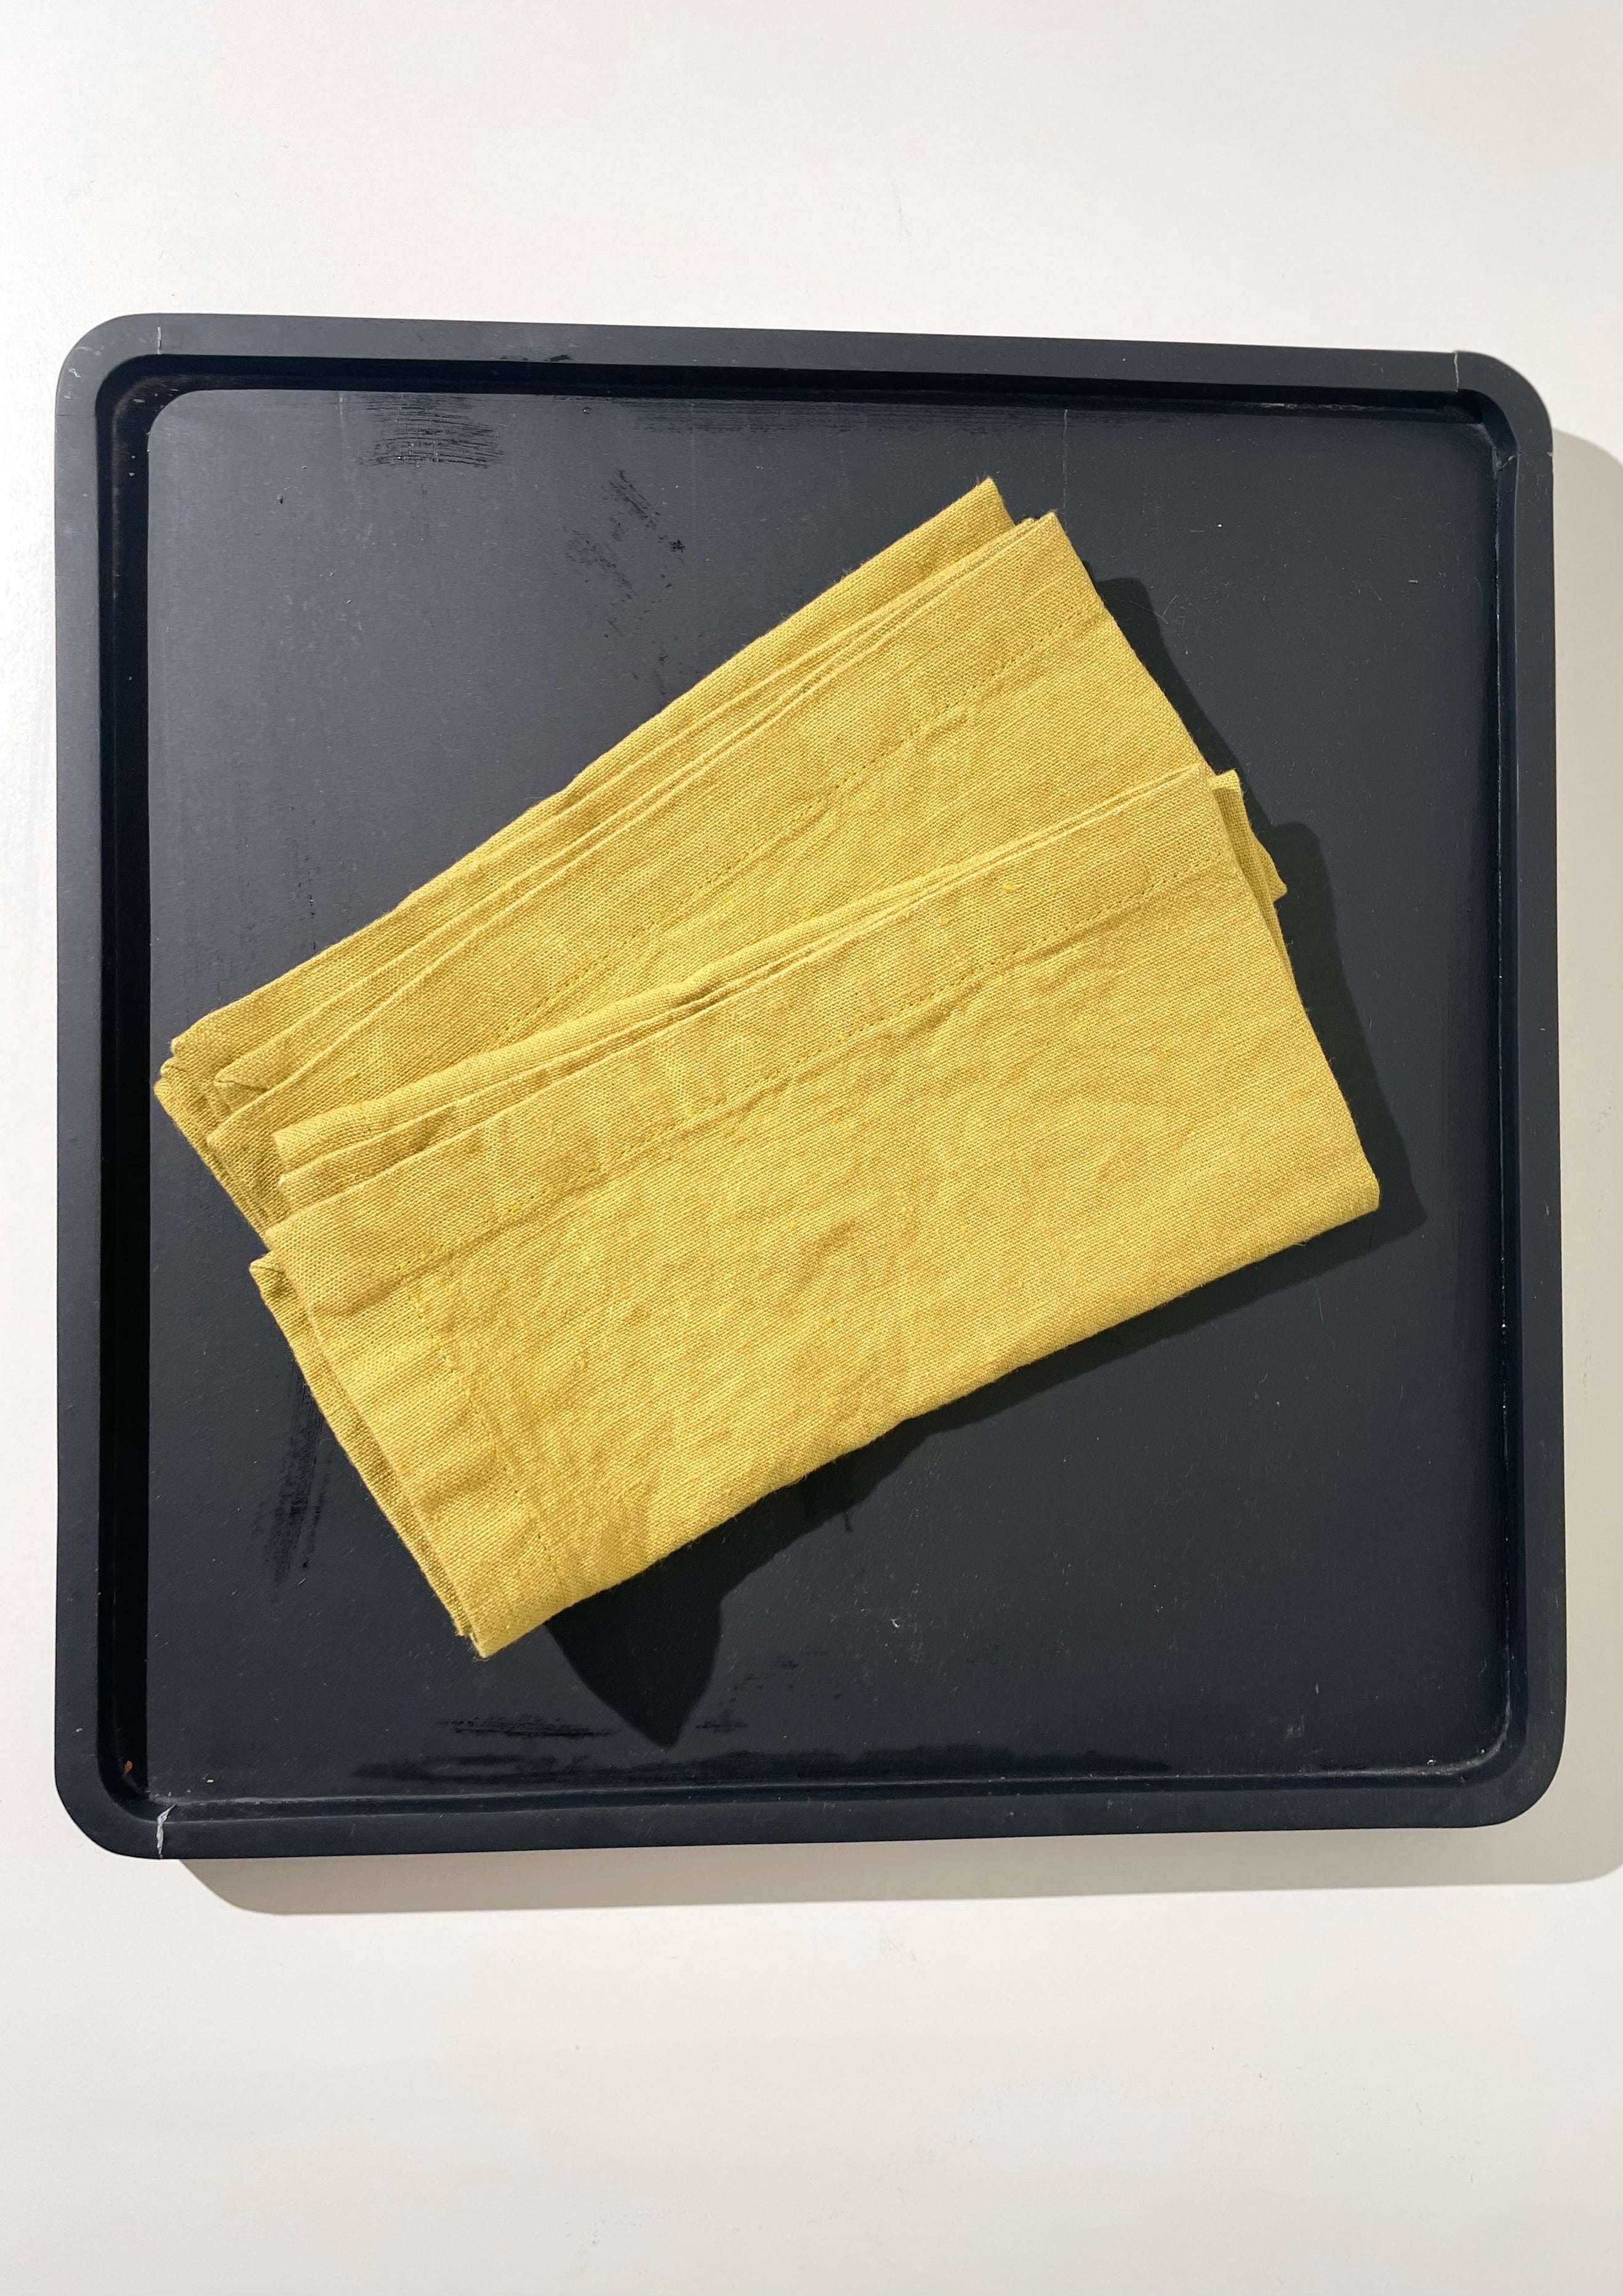 Curry-yellow linen napkins - set of 4